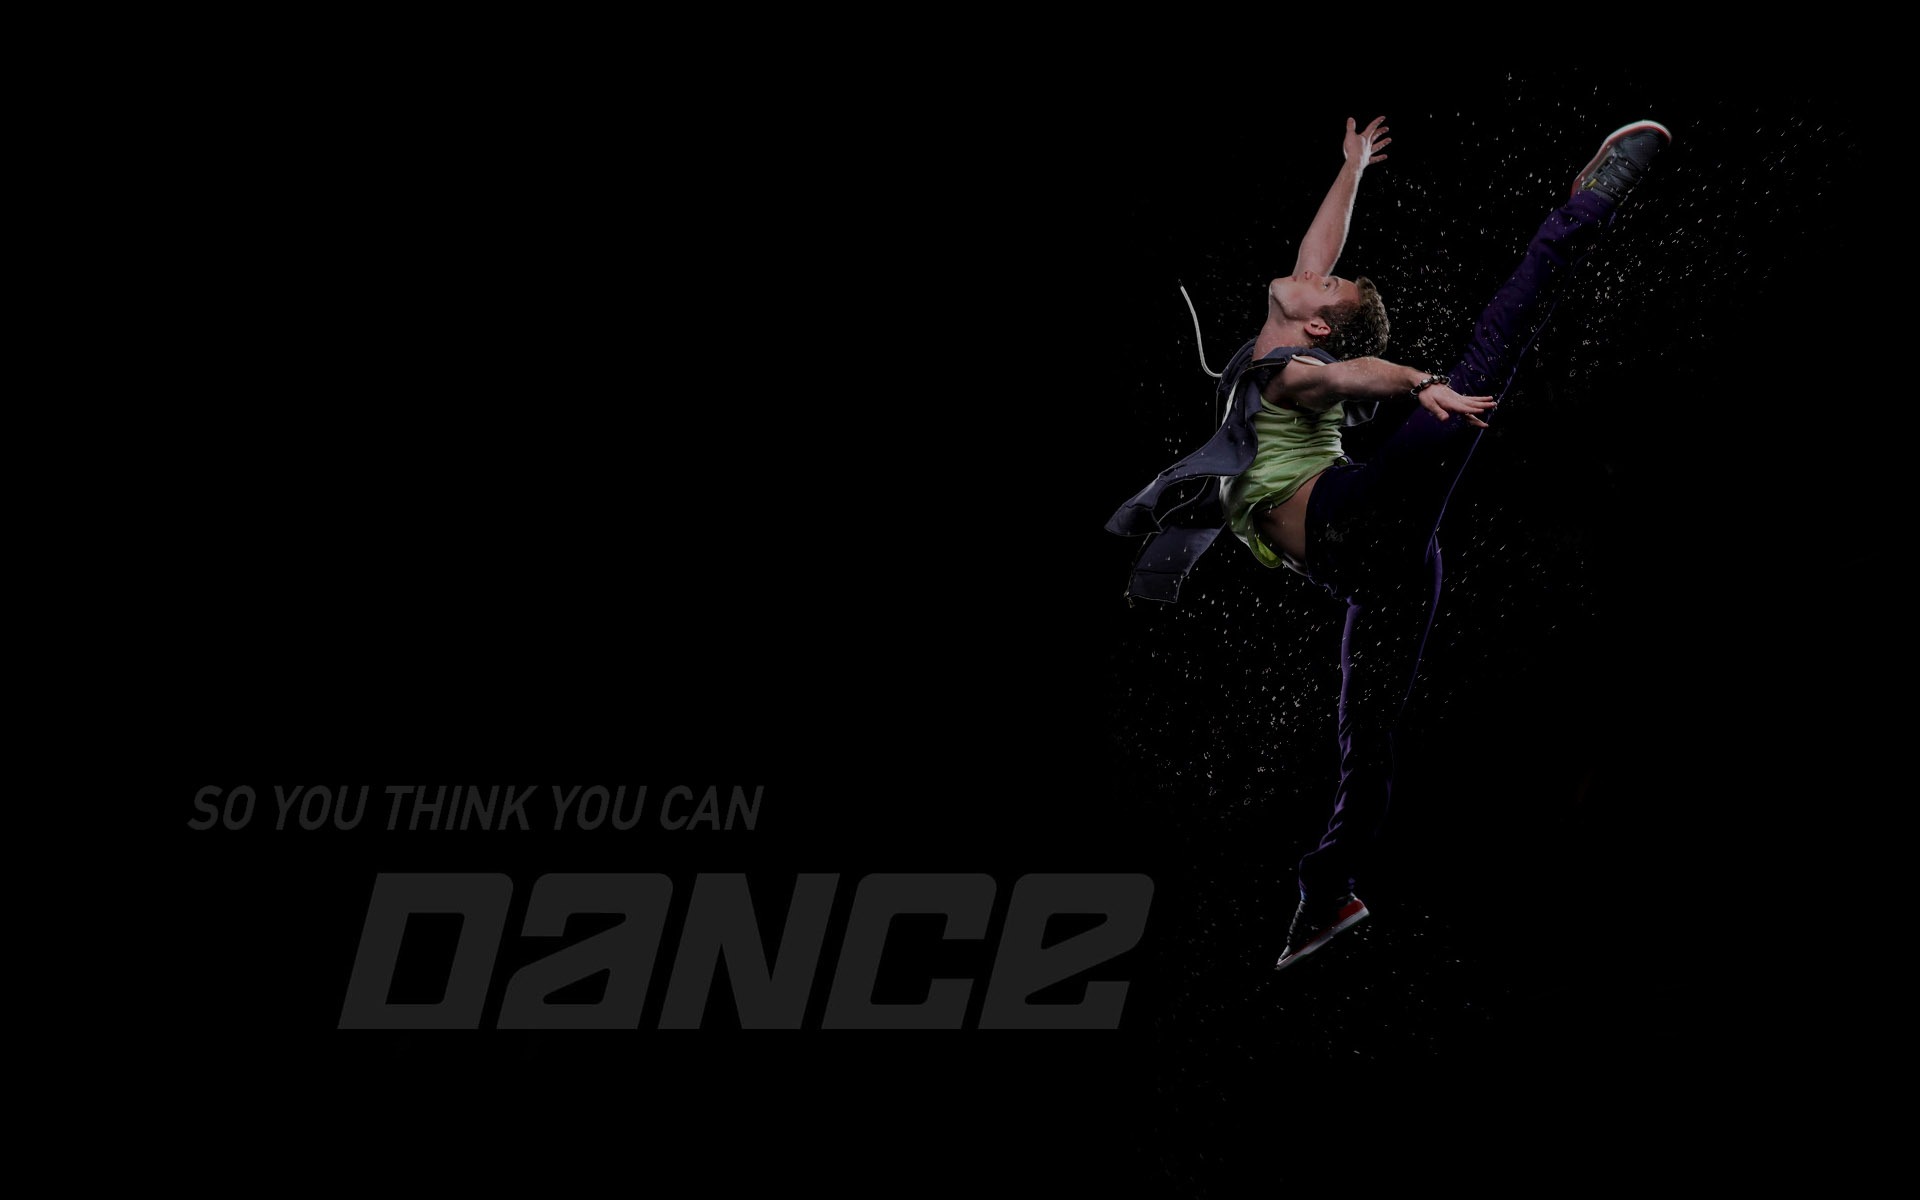 So You Think You Can Dance 舞林争霸 壁纸(二)8 - 1920x1200